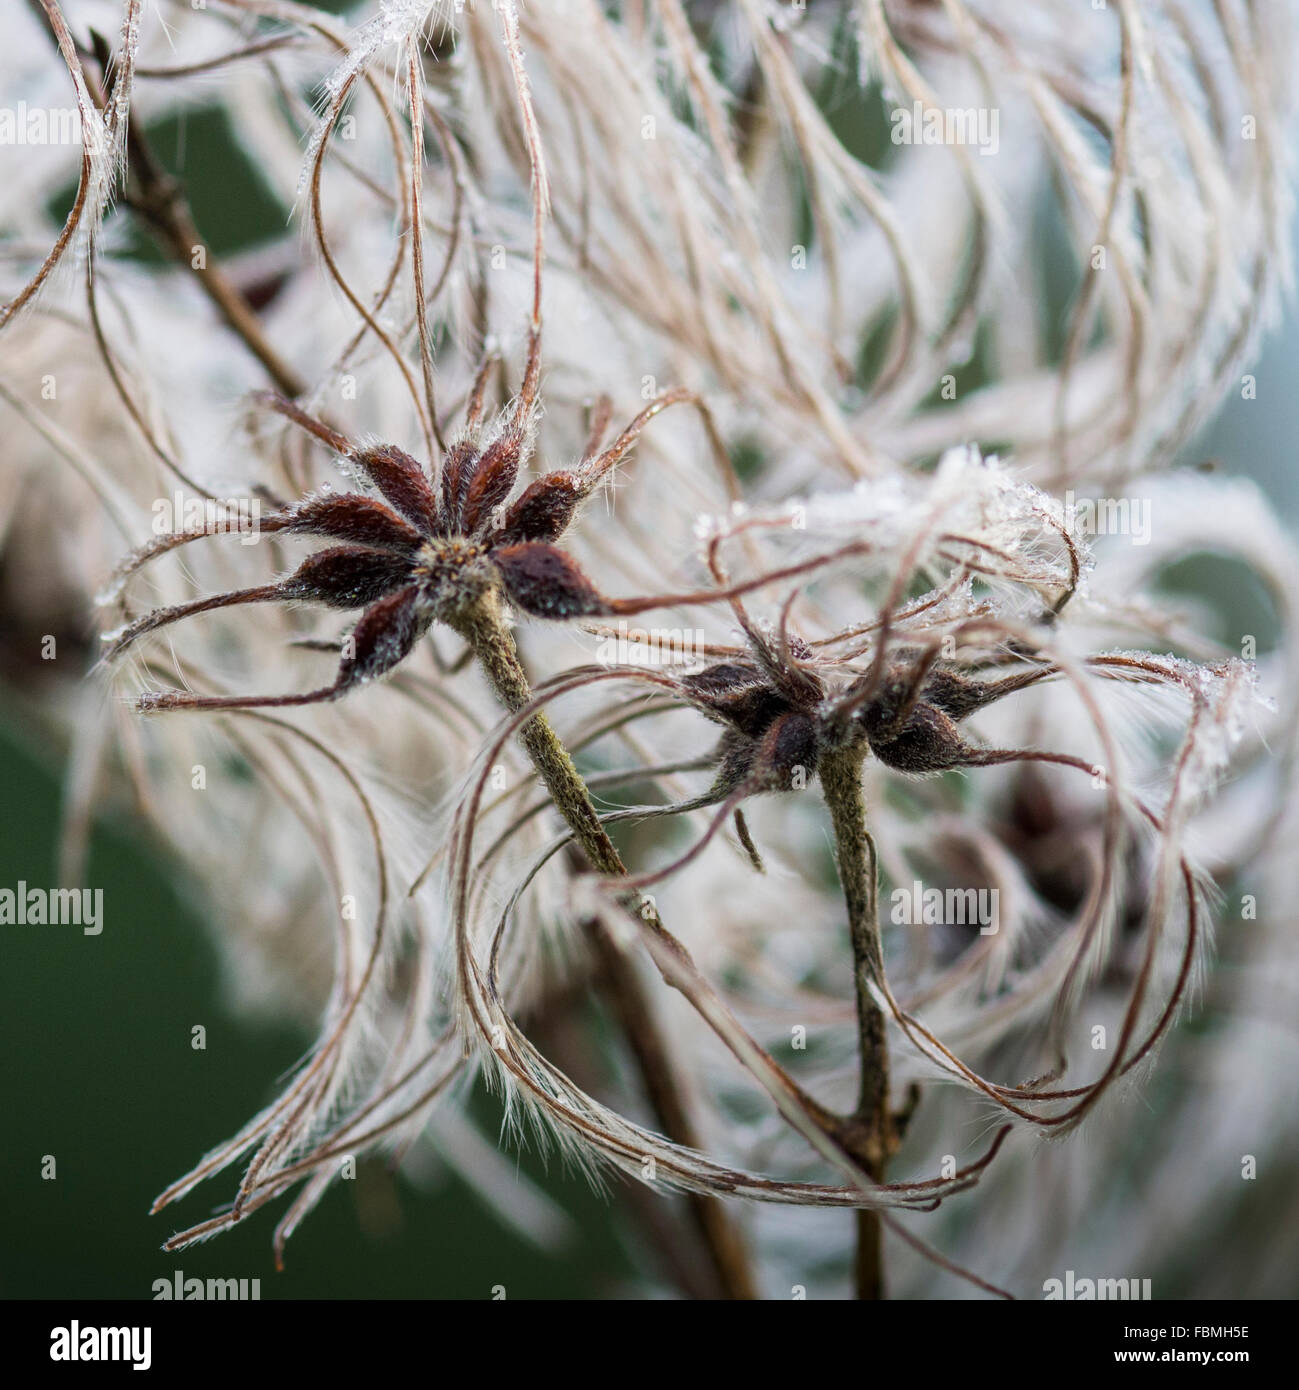 Clematis seed heads blowng in the wind on a fristy morning Stock Photo